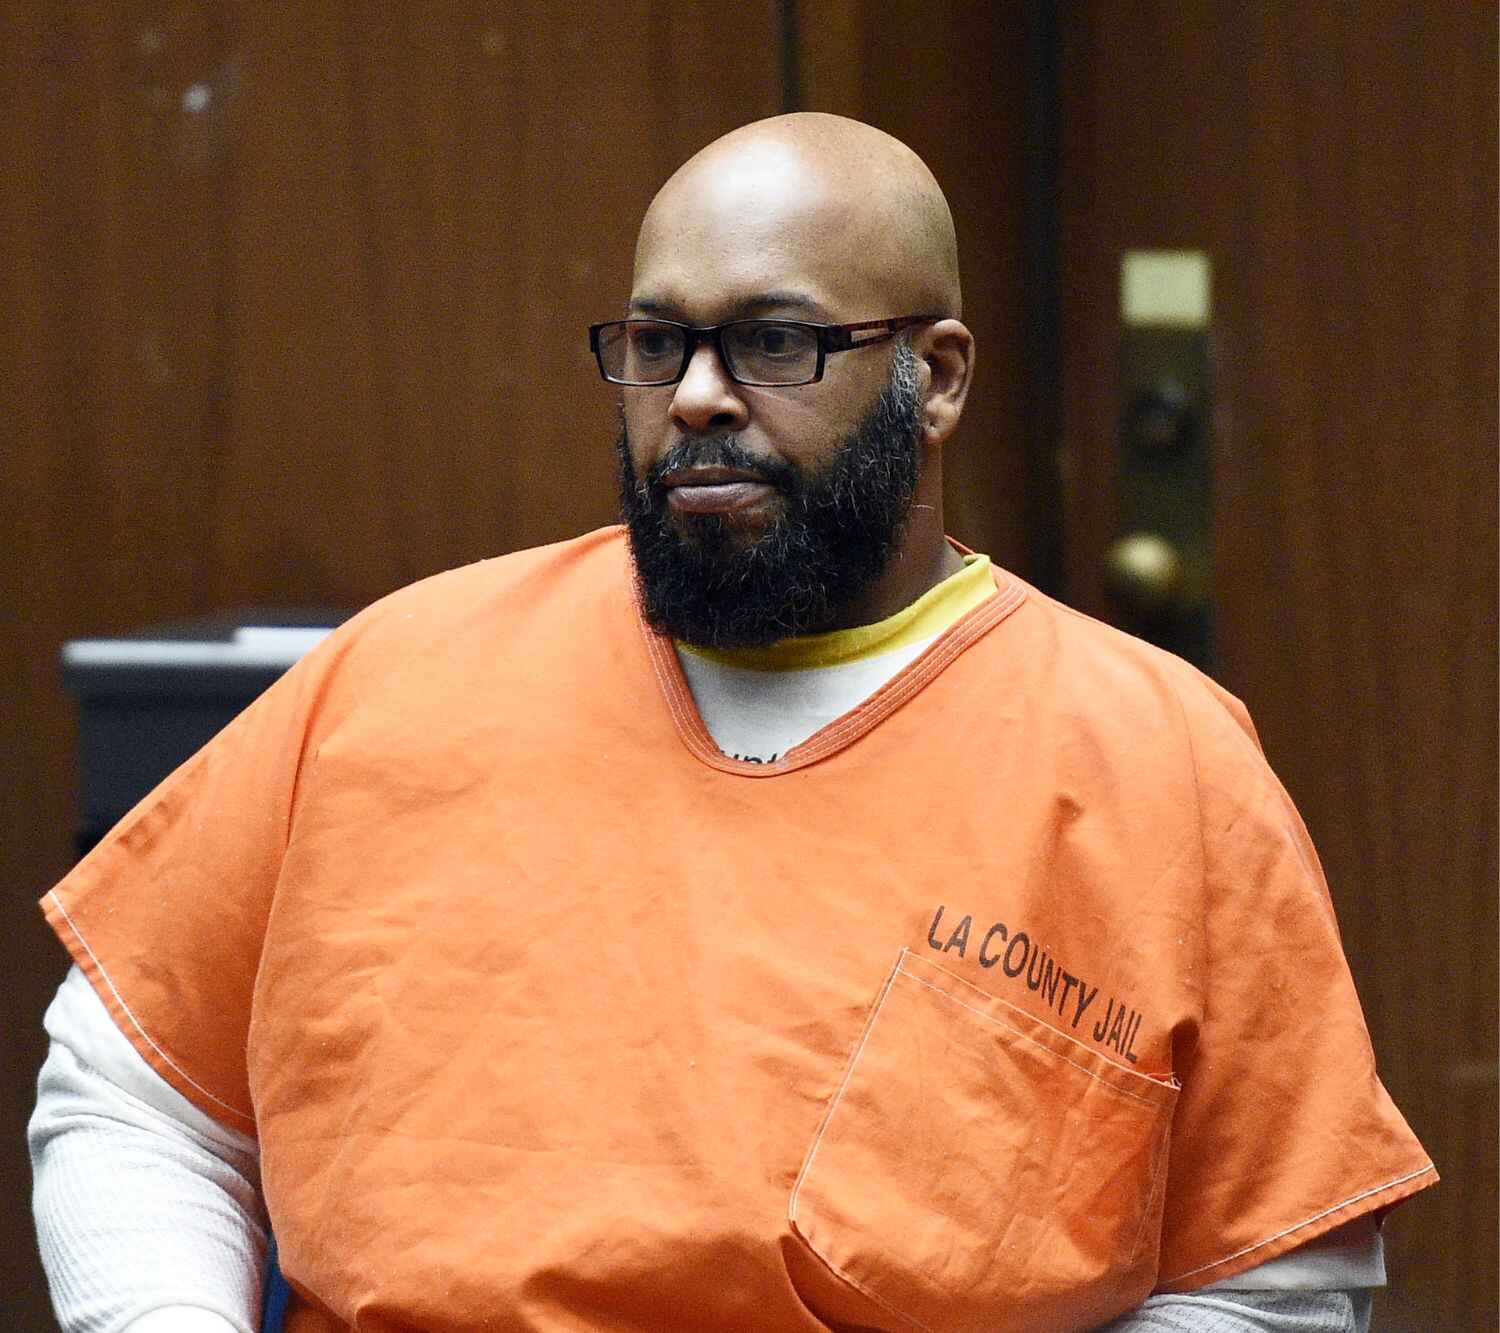 Harry-O Dismisses Suge Knight’s Claims, Talks New Death Row Projects